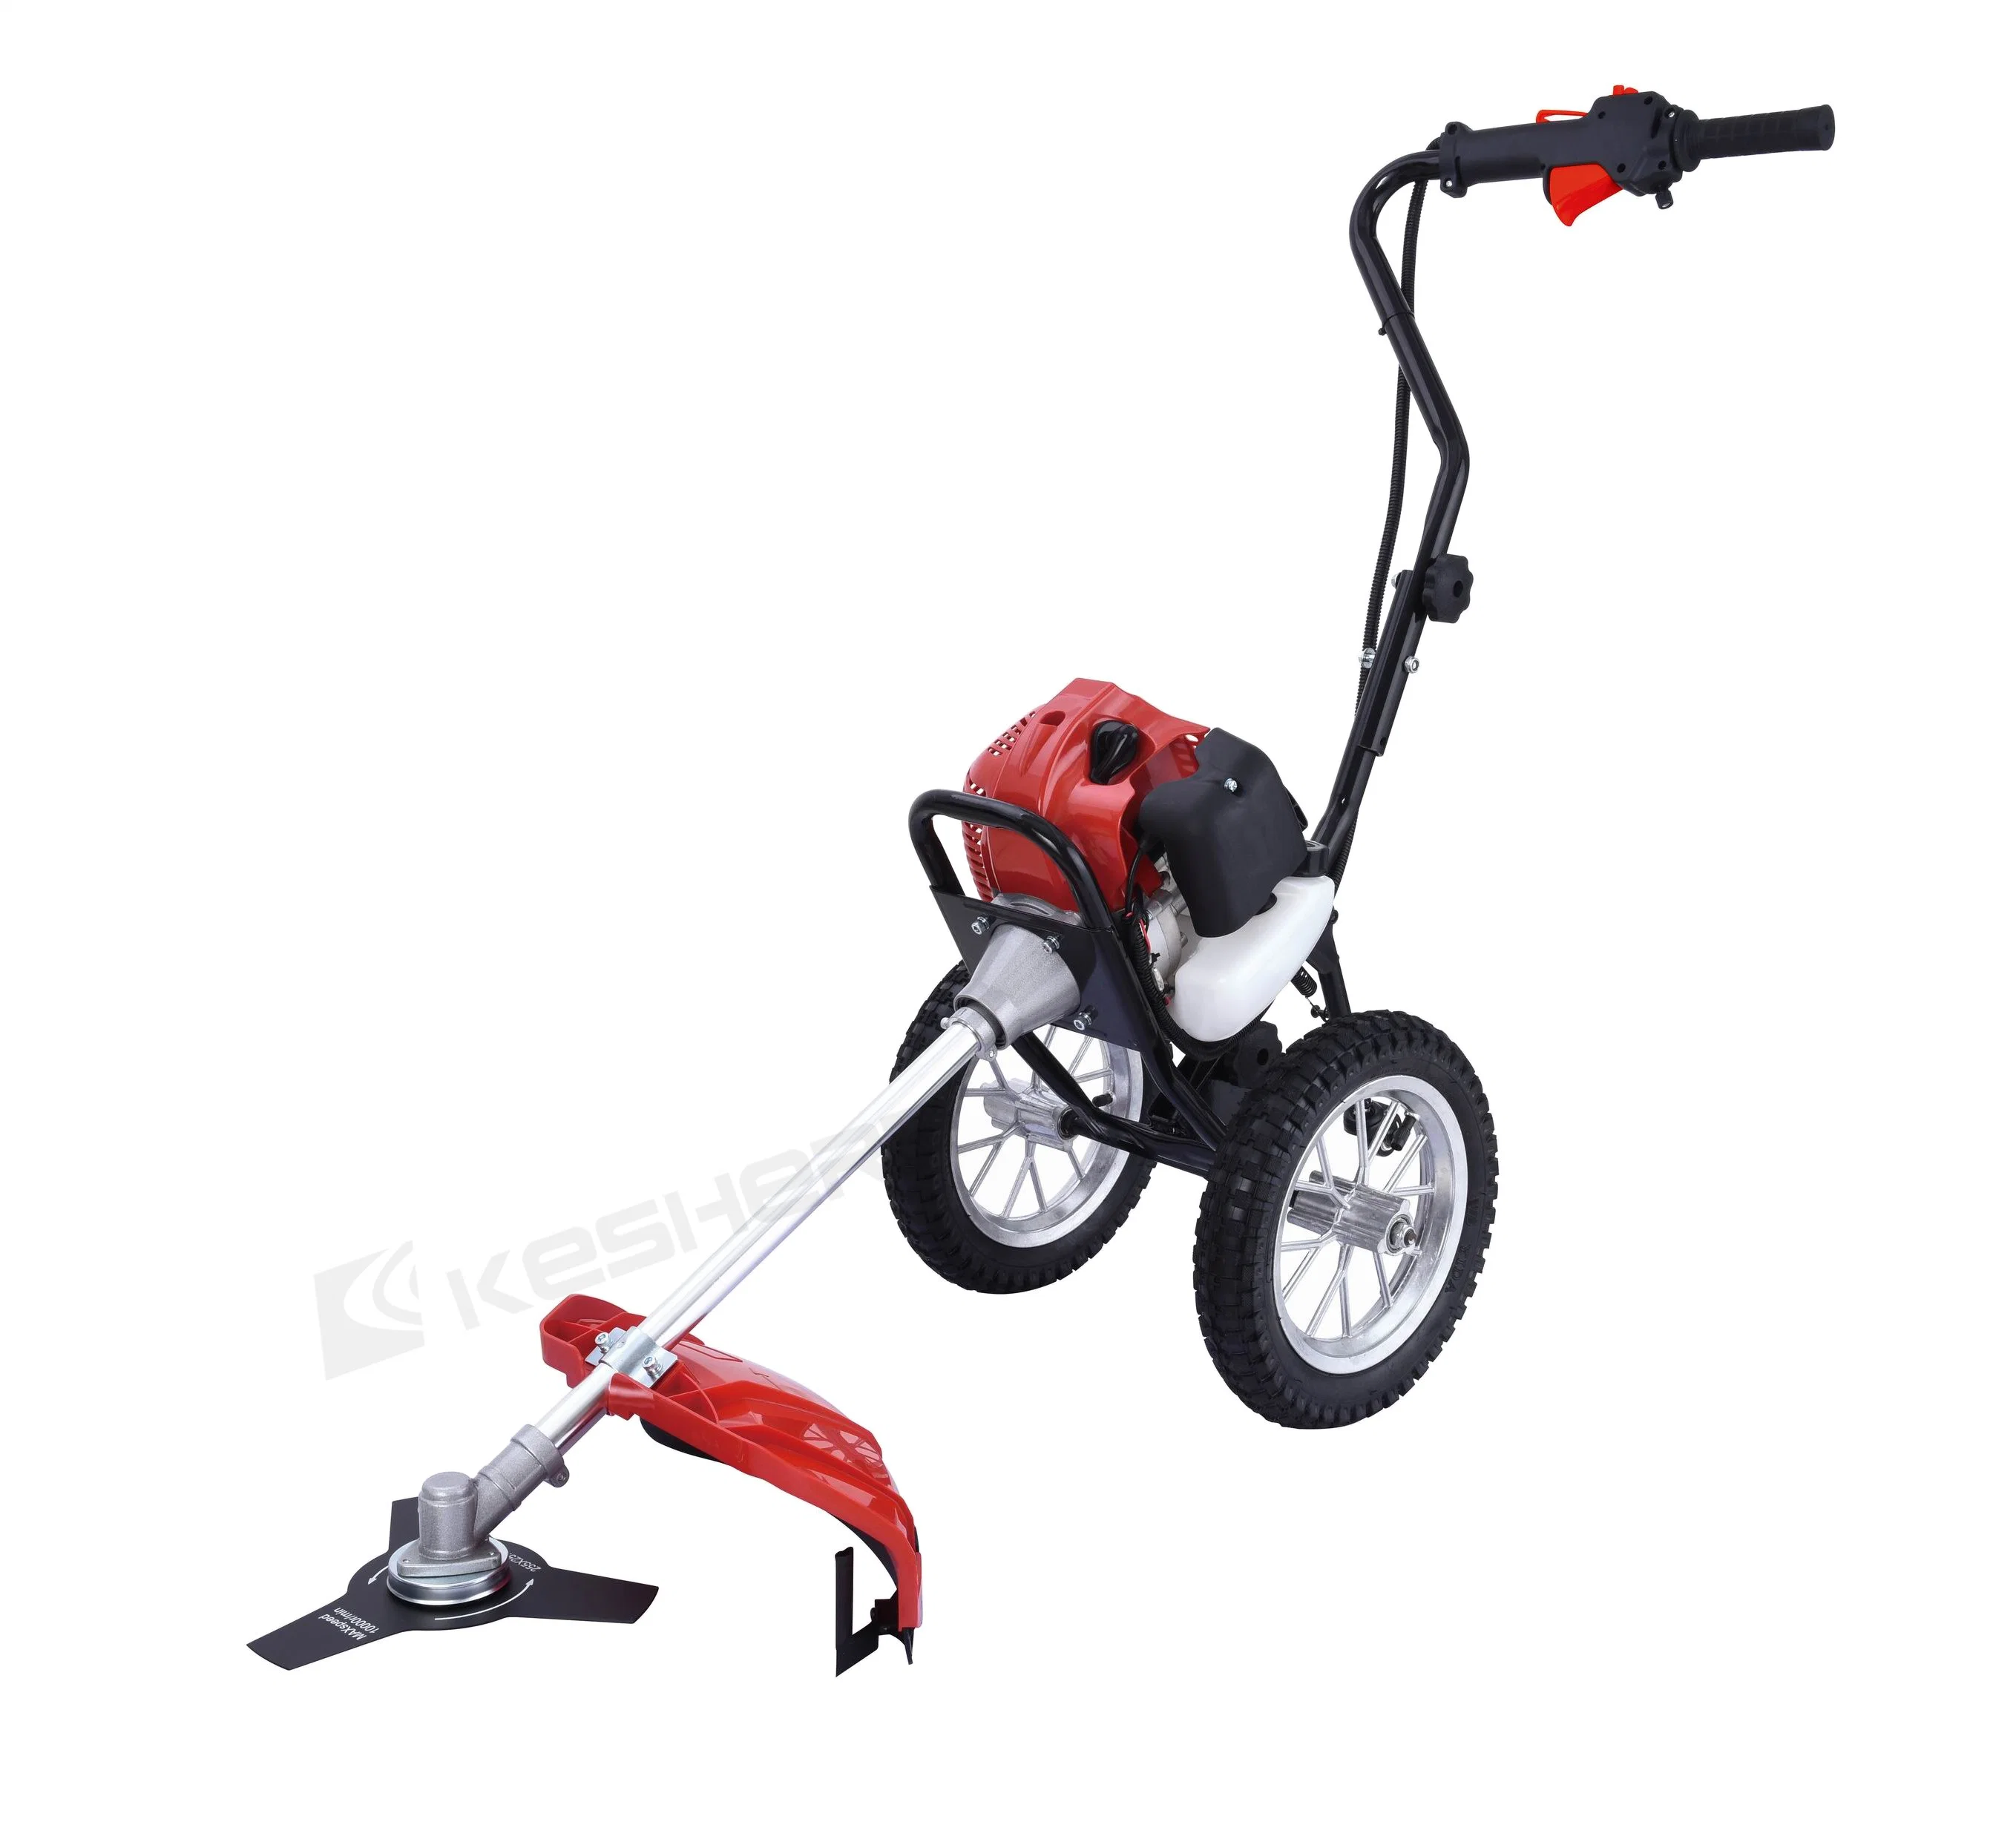 Agricultural Machinery Brush Cutter Lawn Mower